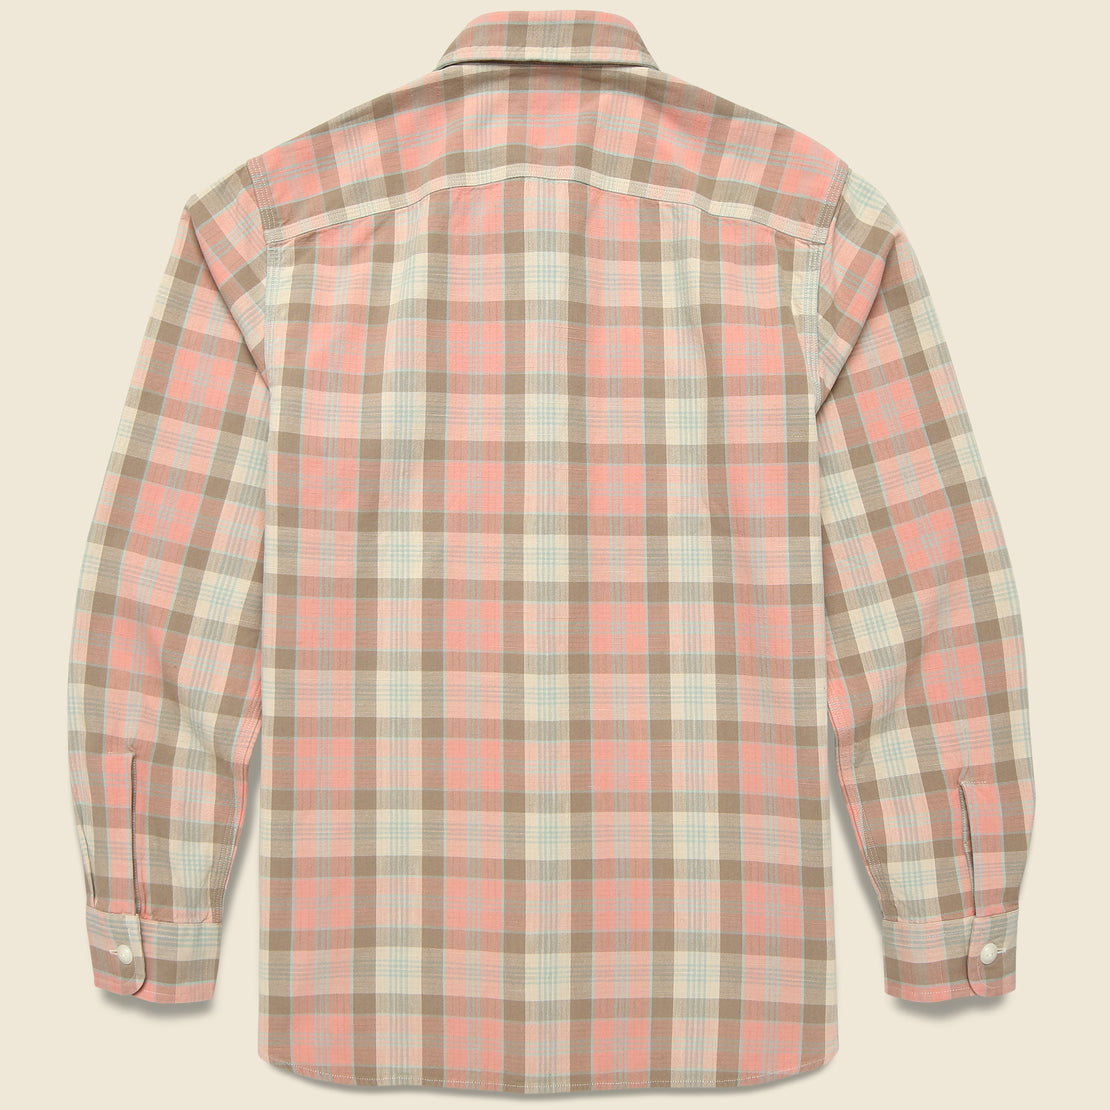 Farrell Workshirt - Pink Multi - RRL - STAG Provisions - Tops - L/S Woven - Plaid